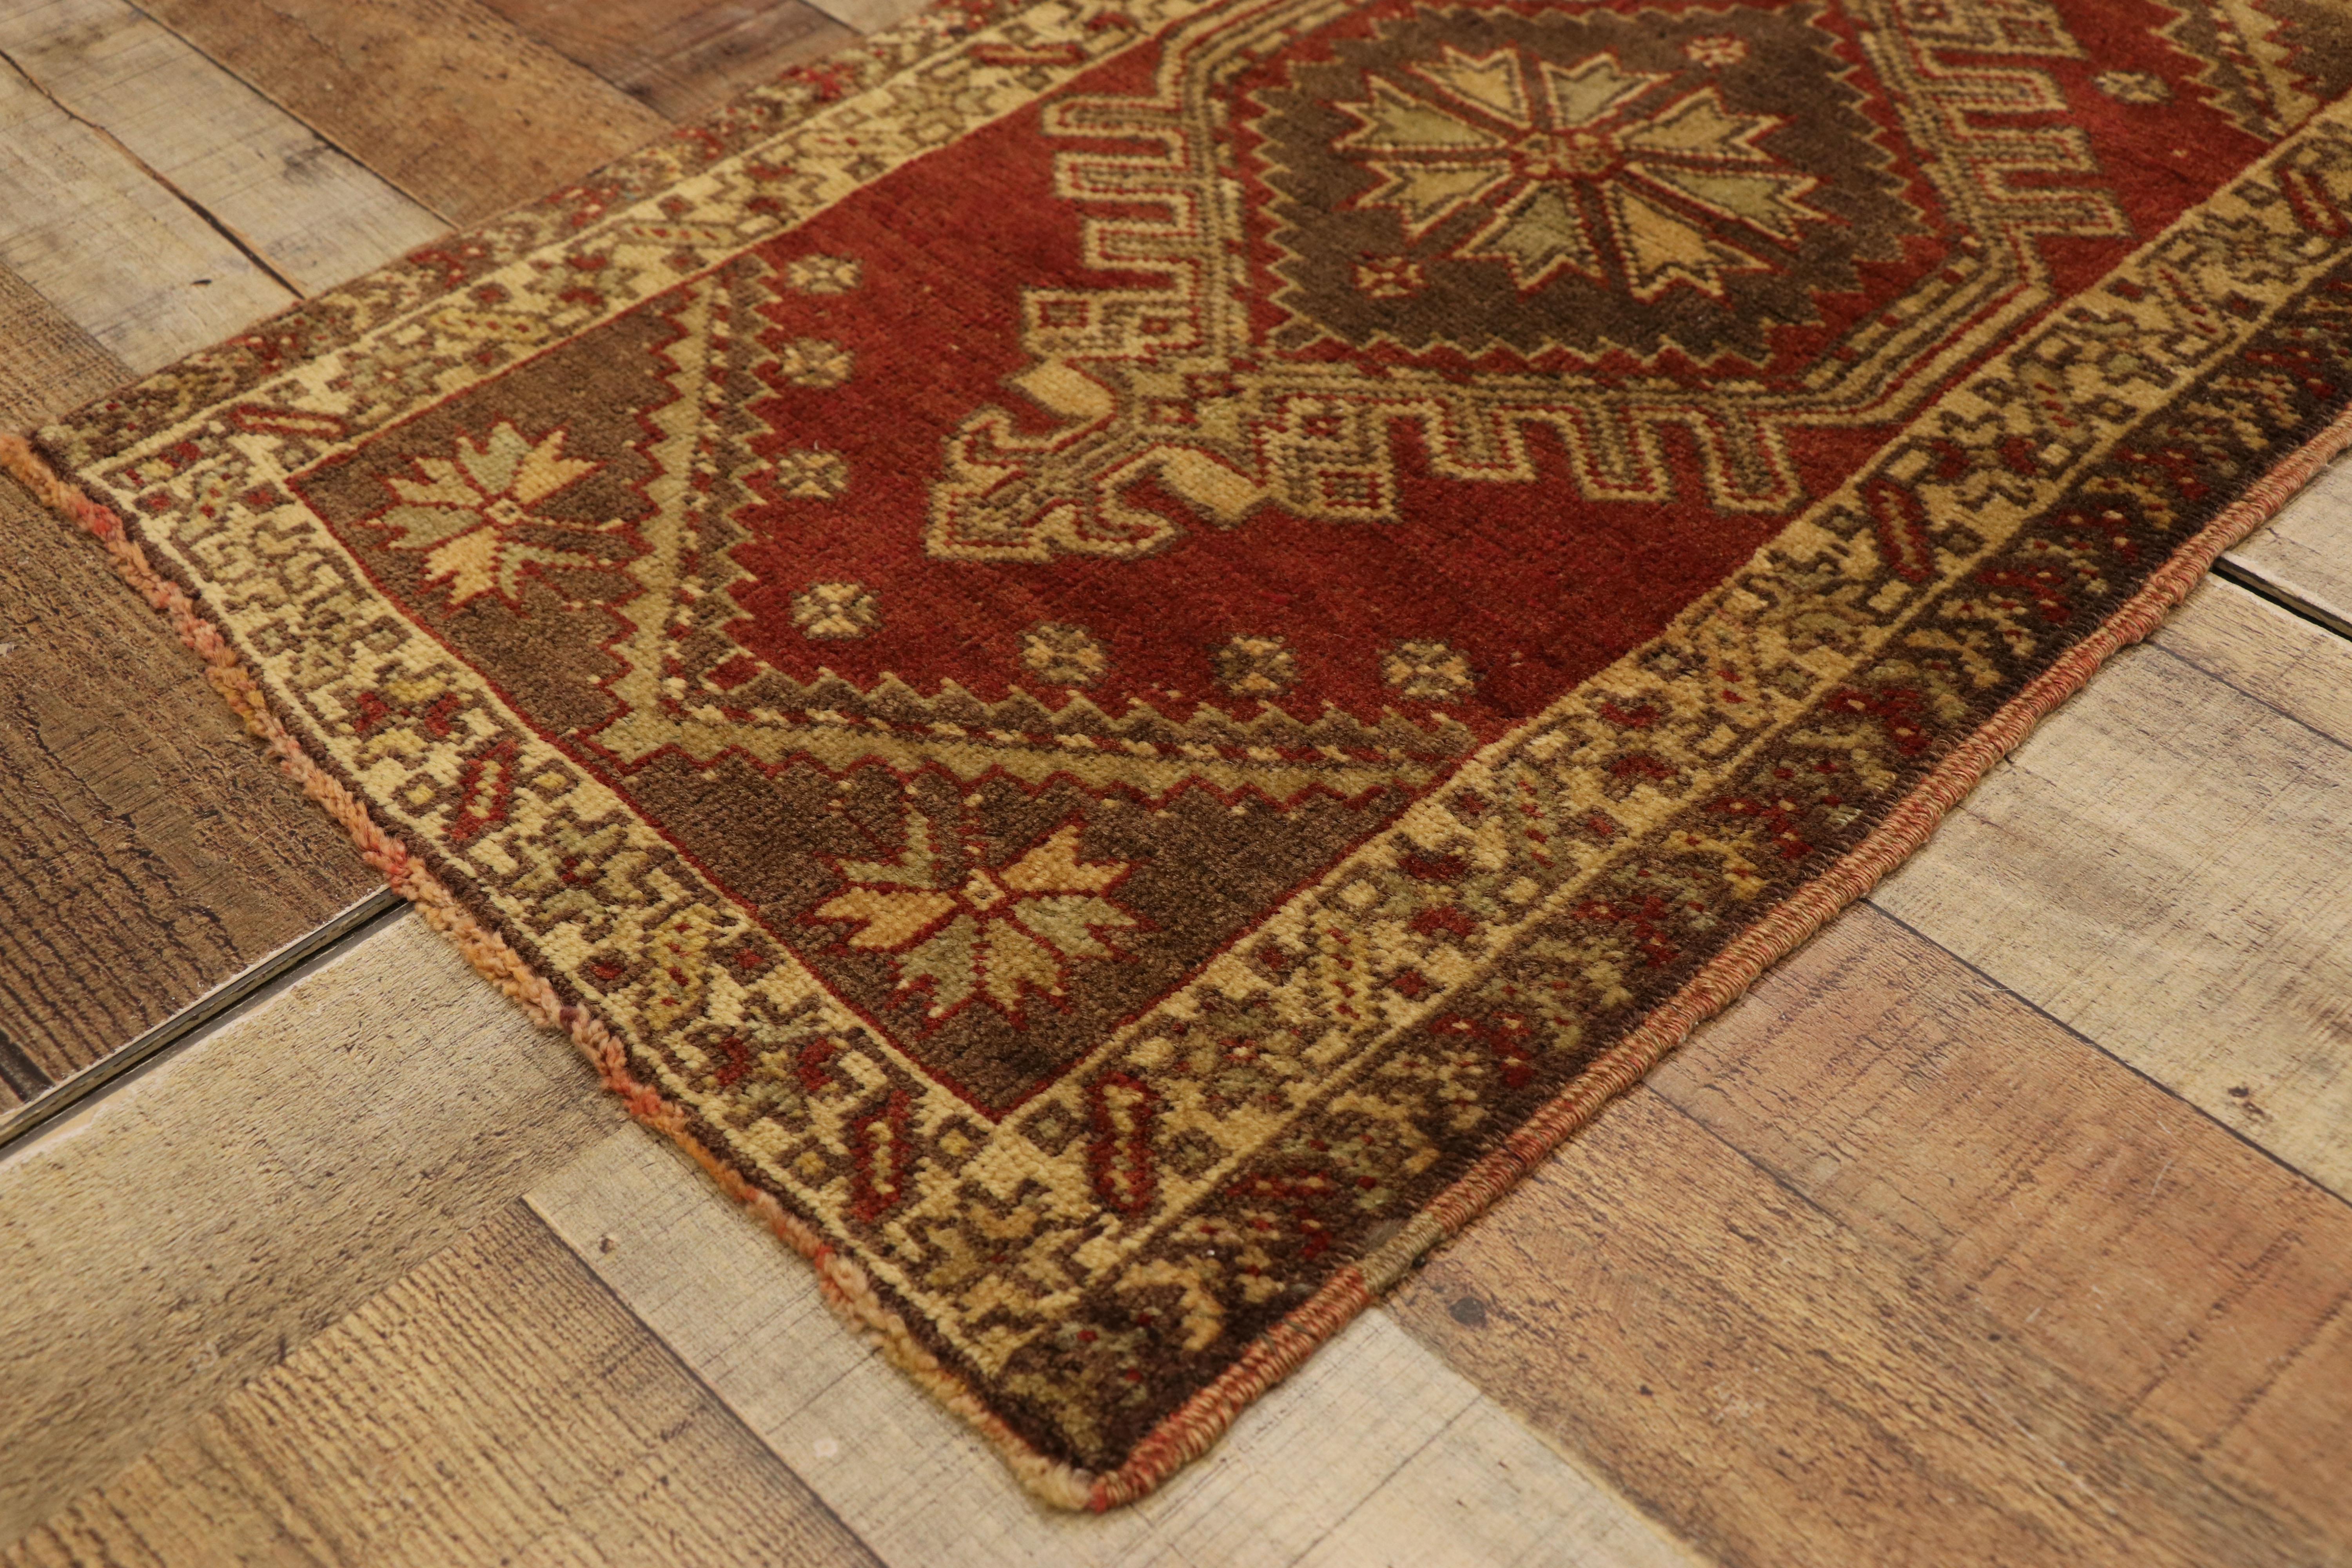 50779 Vintage Turkish Oushak Rug Yastik Scatter Rug, Small Accent Rug 01'07 x 02'08. This vintage Turkish Oushak rug features a modern traditional style. Immersed in Anatolian history and refined colors, this vintage Oushak rug combines simplicity